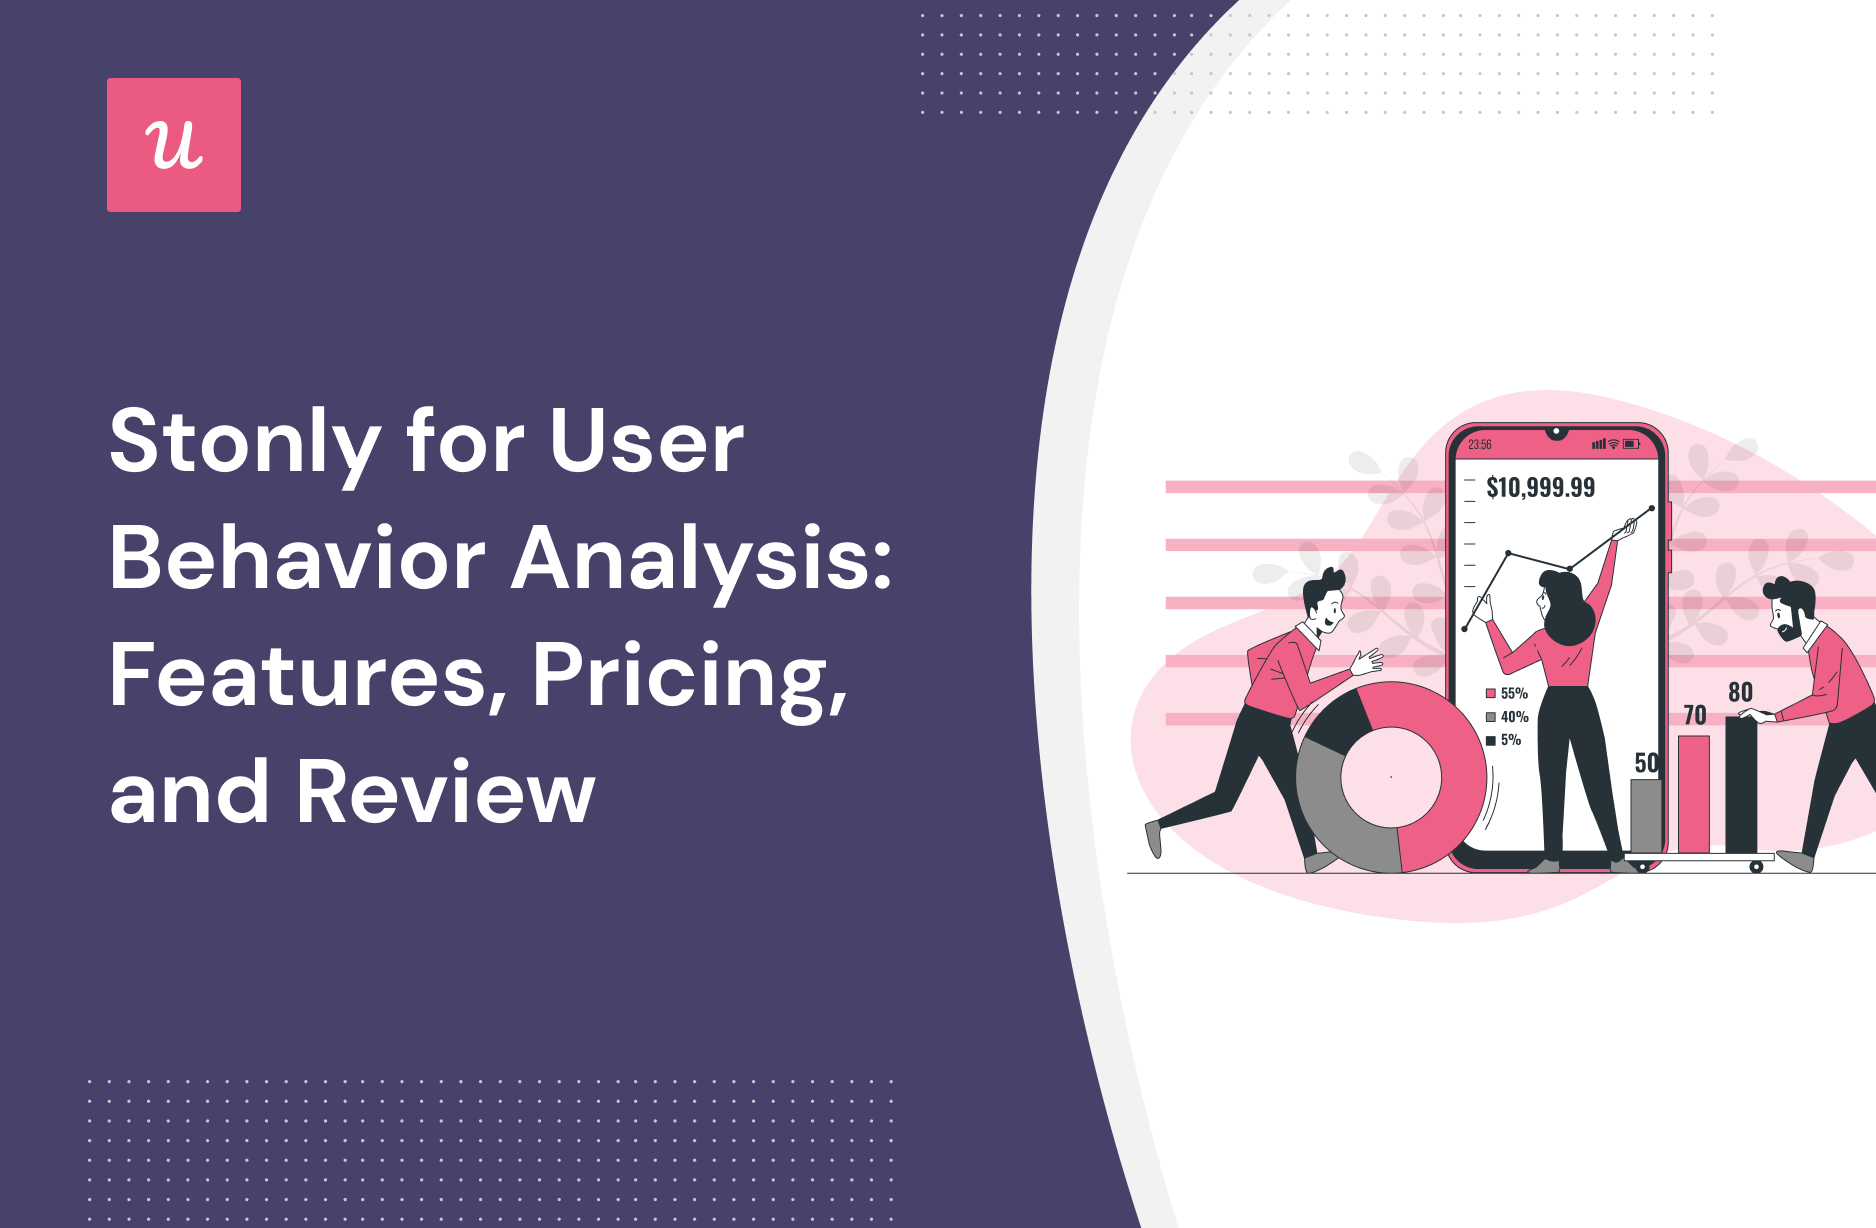 Stonly for User Behavior Analysis: Features, Pricing, and Review